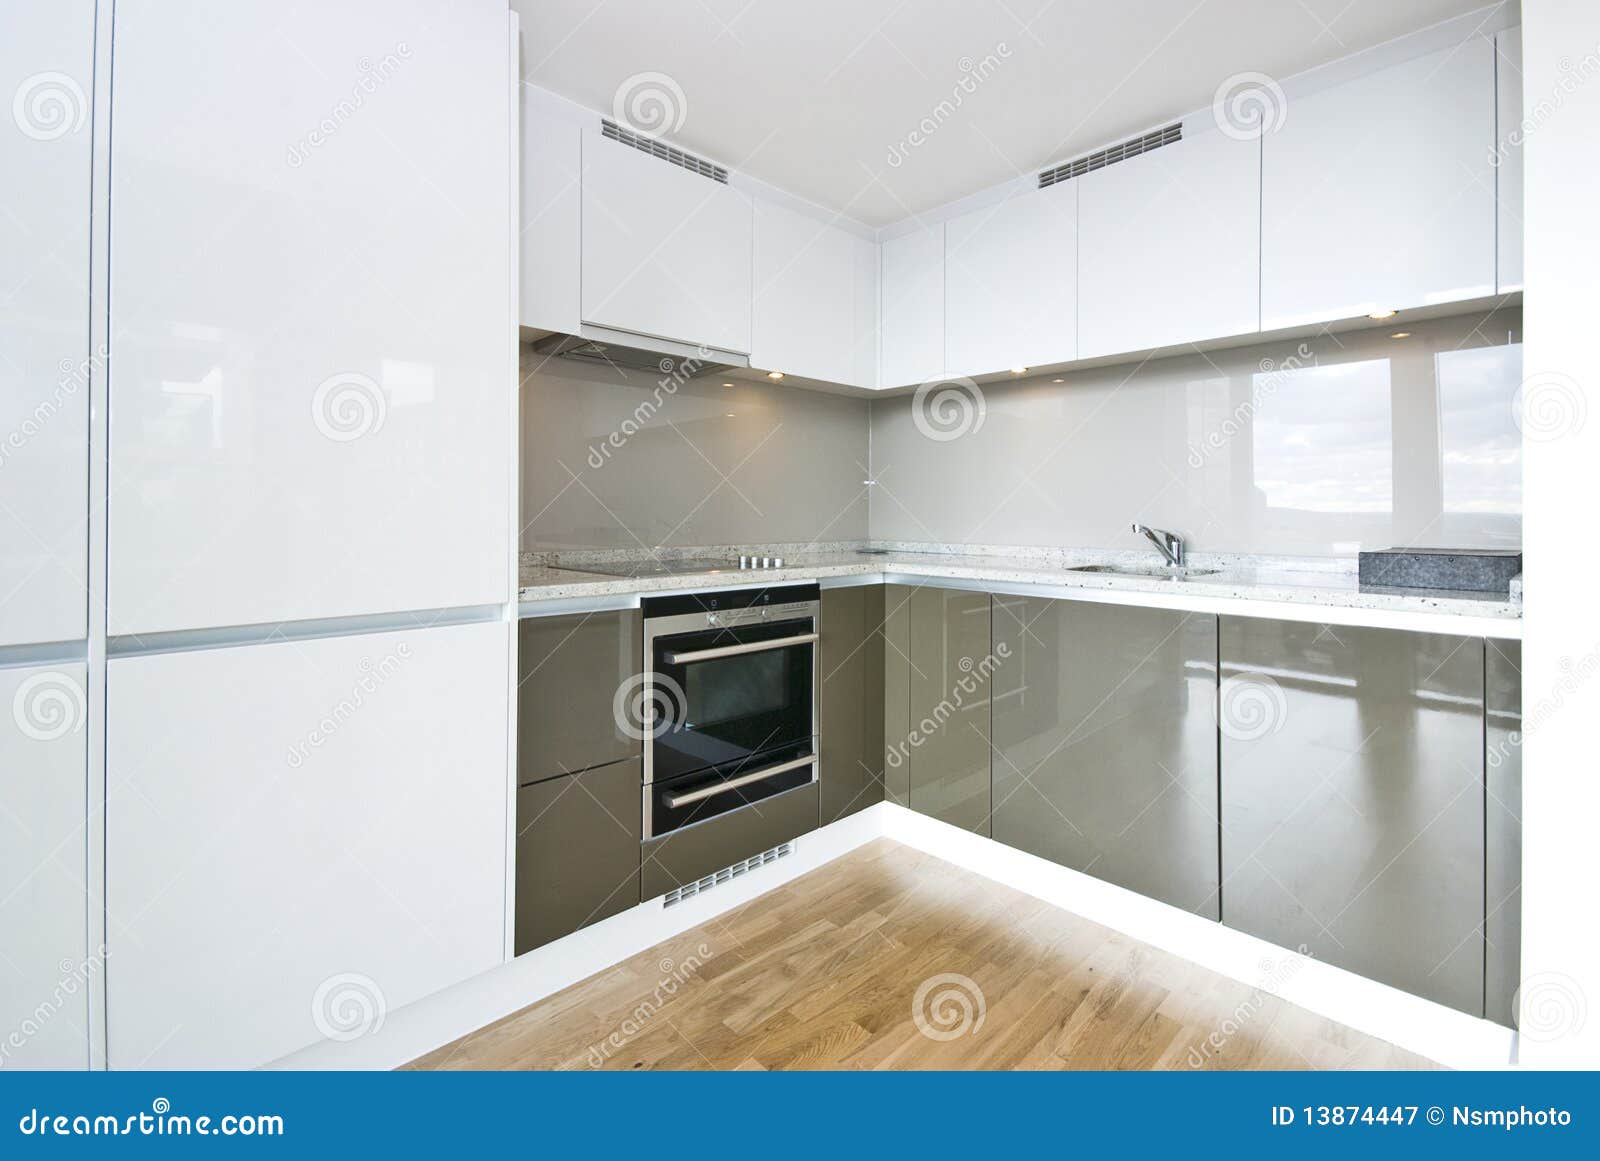 Modern Fully Fitted Kitchen Stock Image 13874527